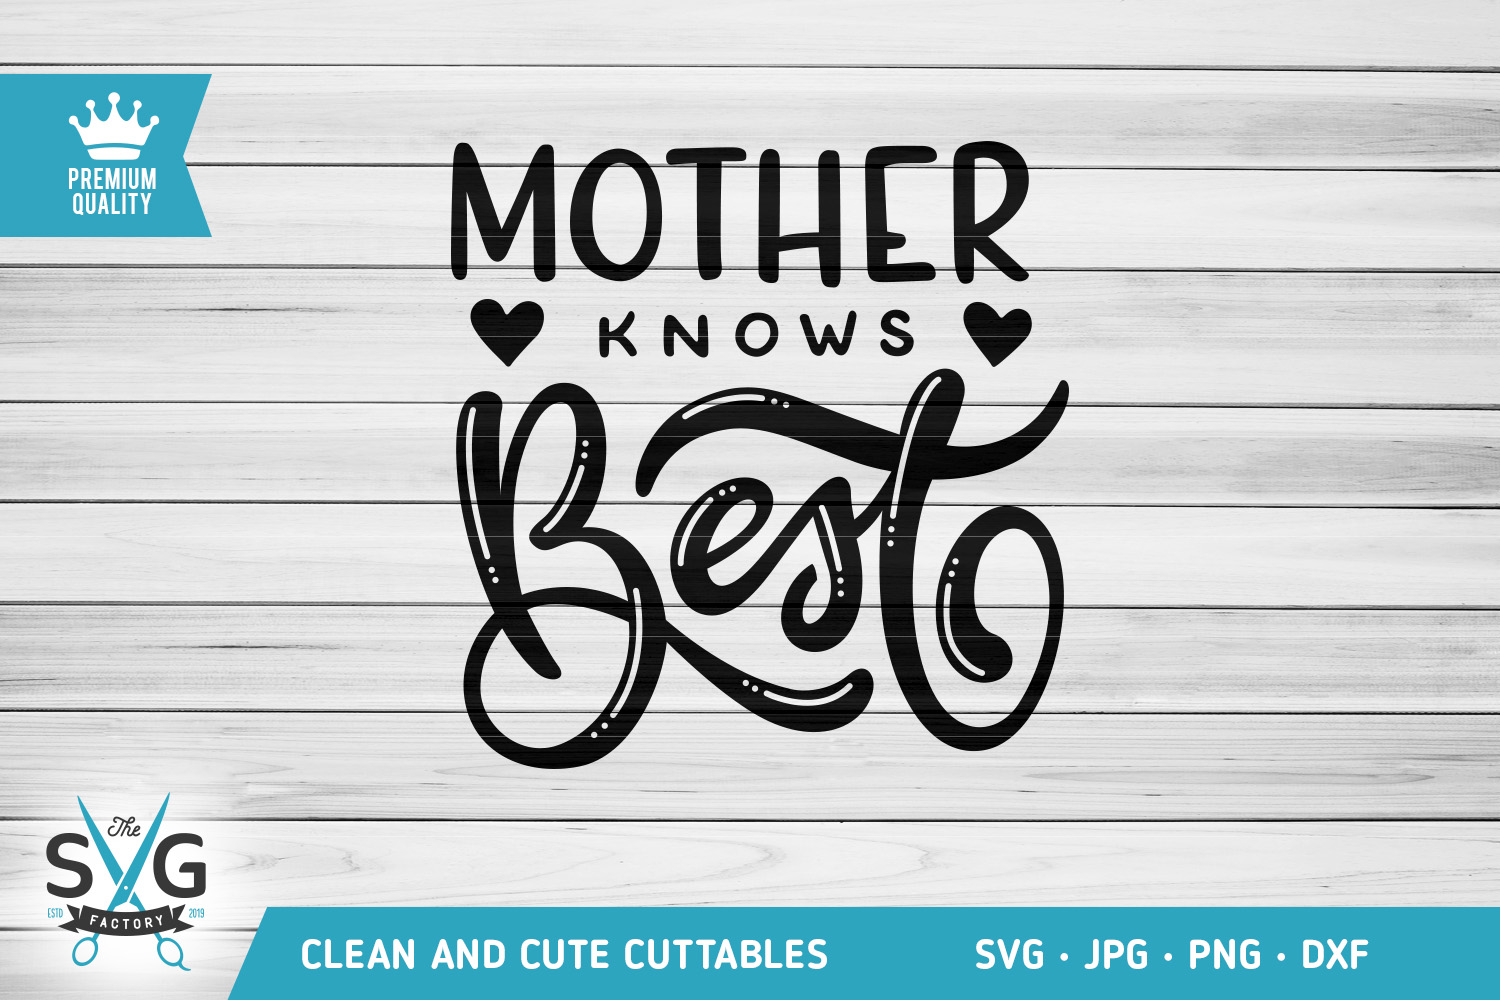 Download Mother Knows Best SVG cutting file